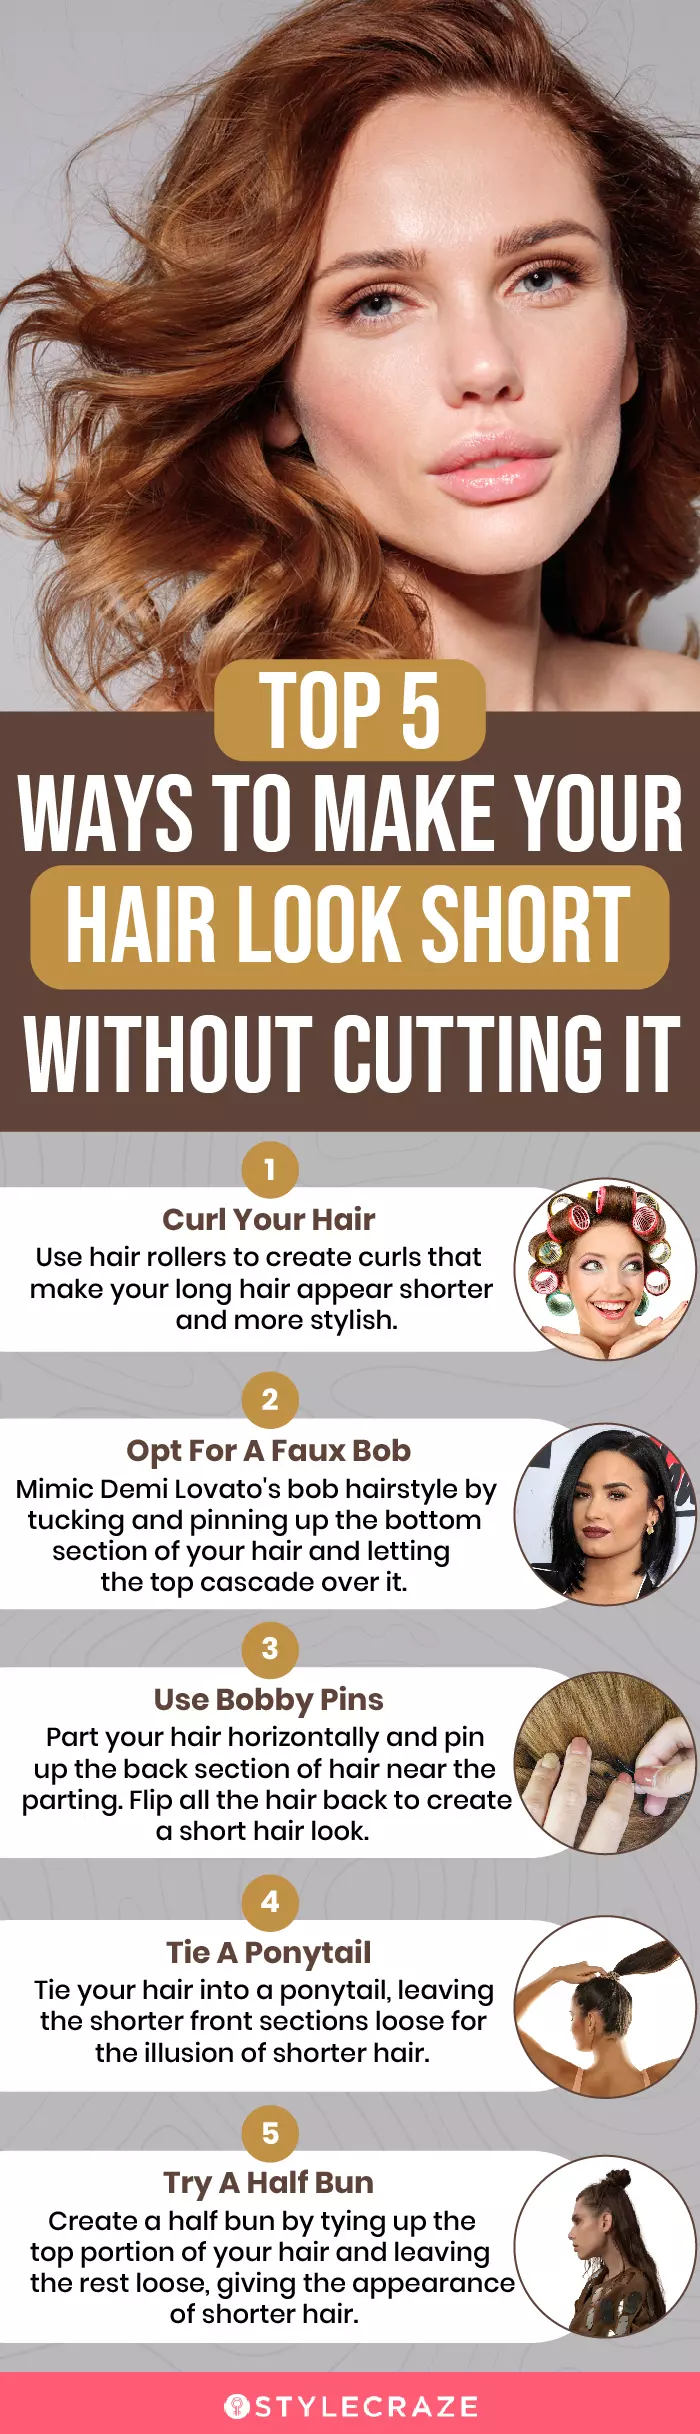 top 5 ways to make hair look short without cutting it (infographic)